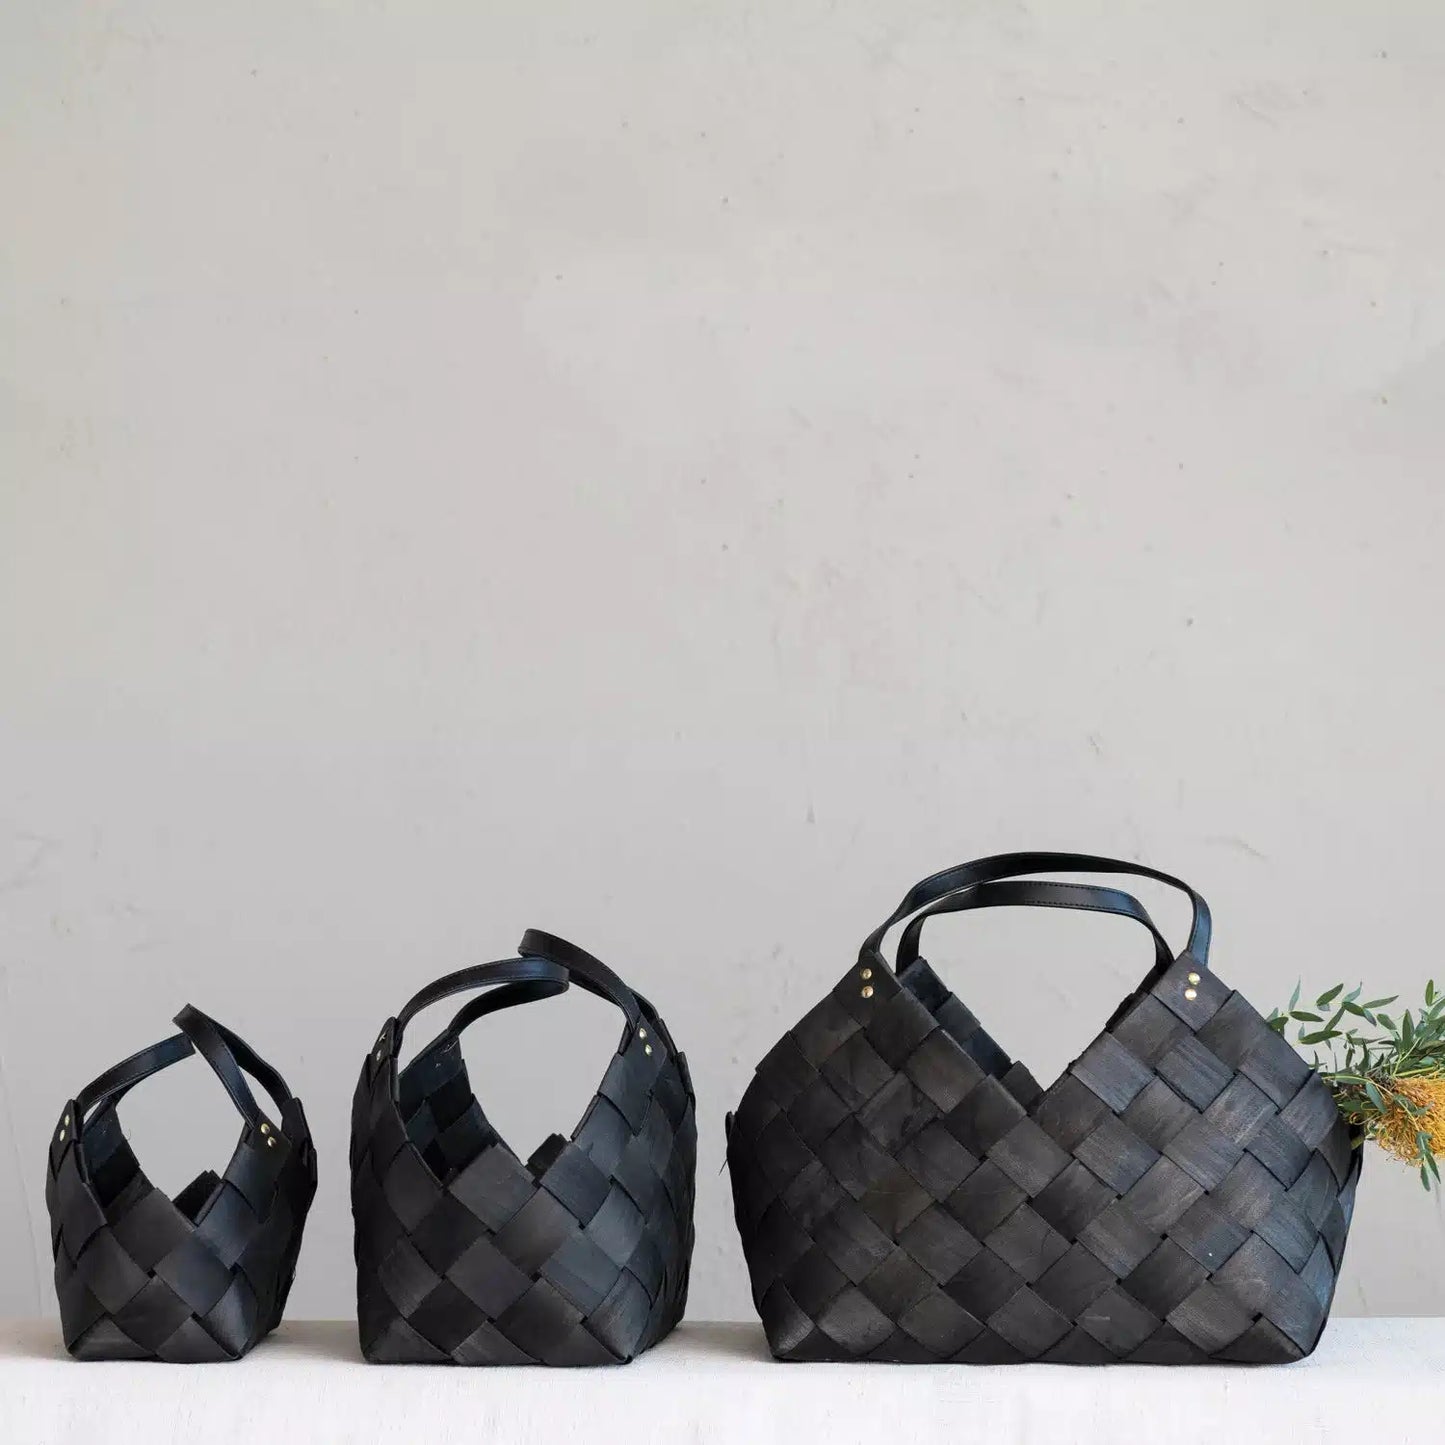 Woven Baskets with Handles, Black